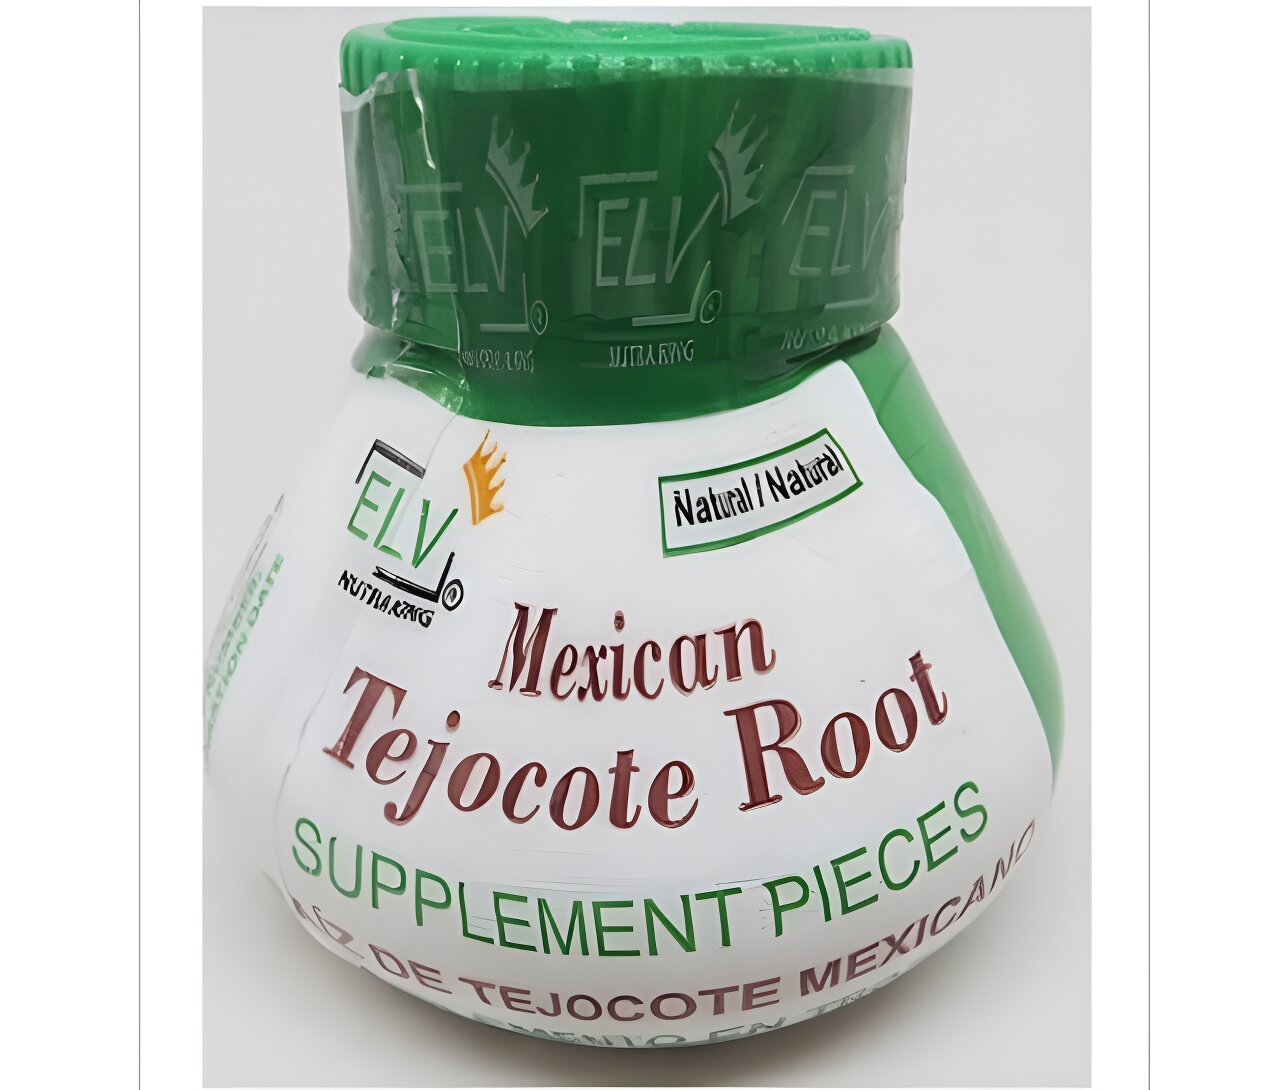 Tejocote supplements sold online at Amazon, Etsy may contain fatal poison: FDA